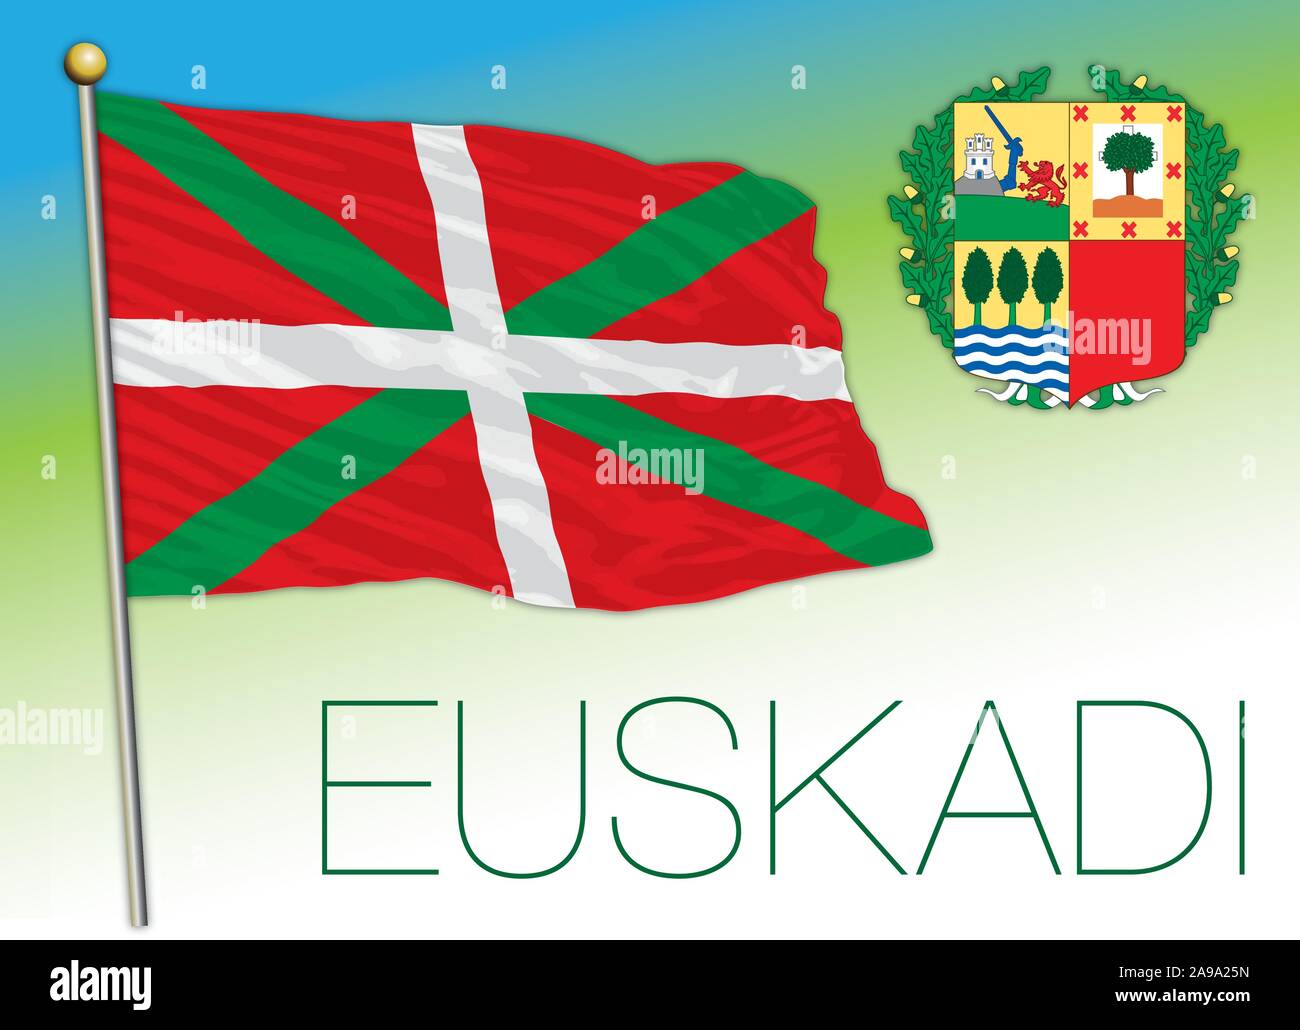 Basque country coat of arms Stock Vector Images - Alamy